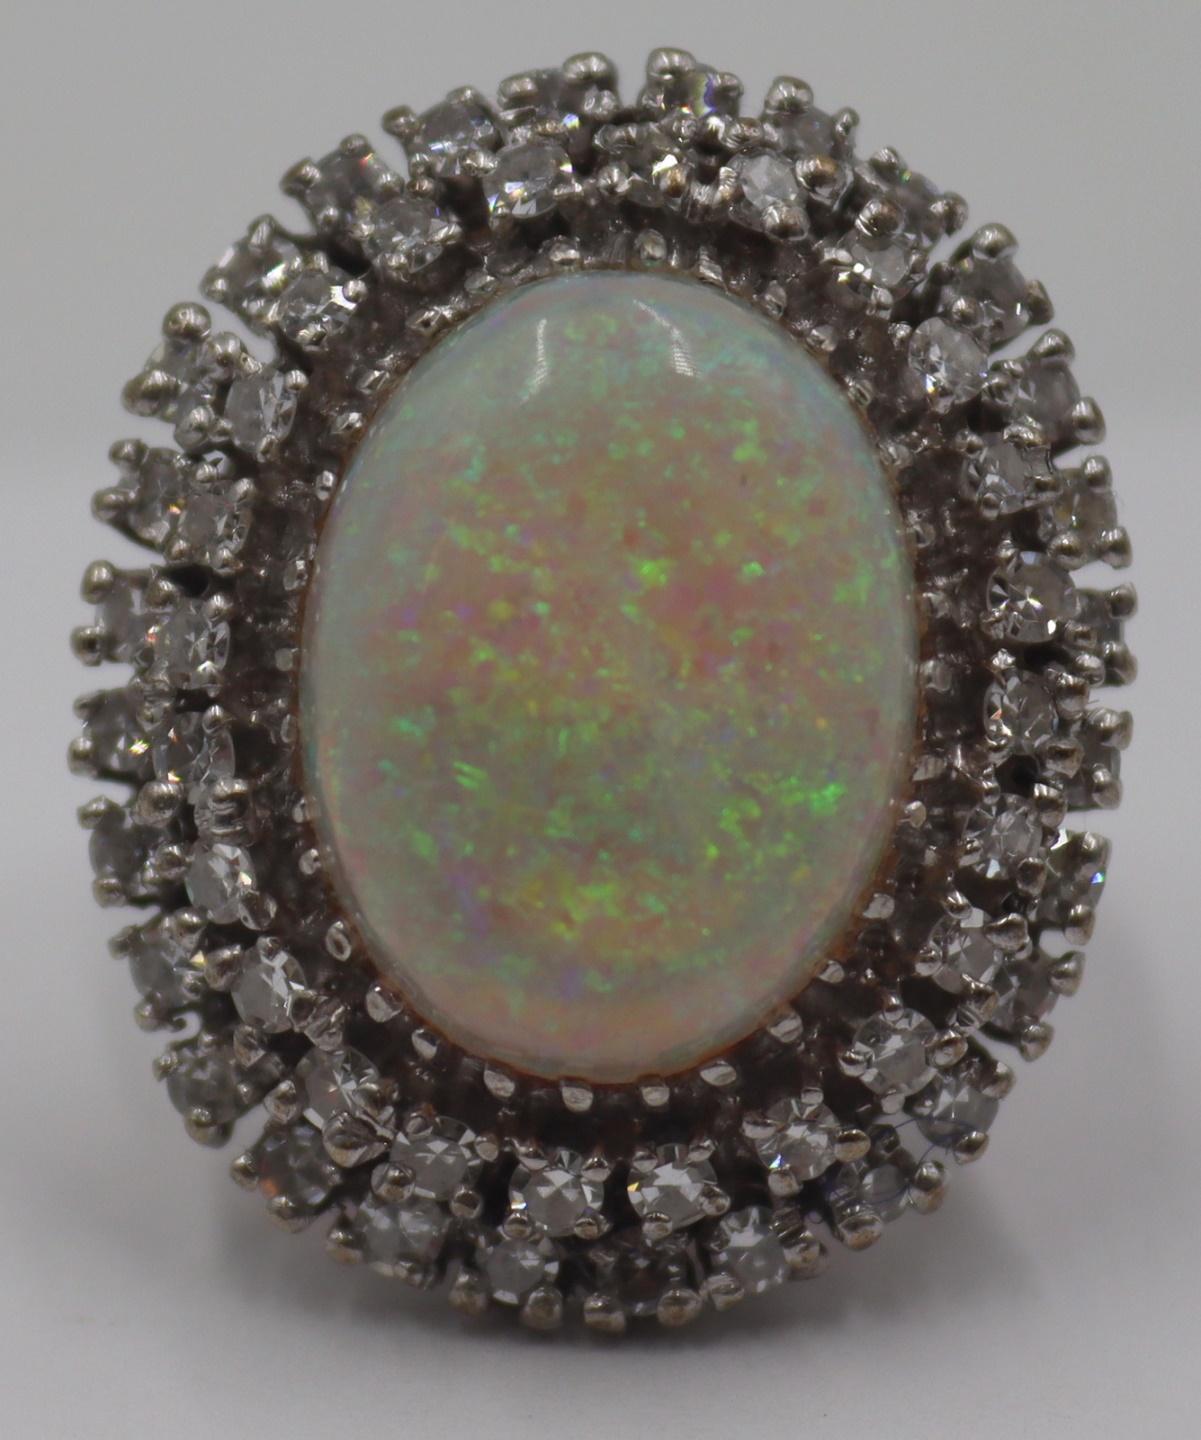 JEWELRY 14KT GOLD OPAL AND DIAMOND 3bc33c